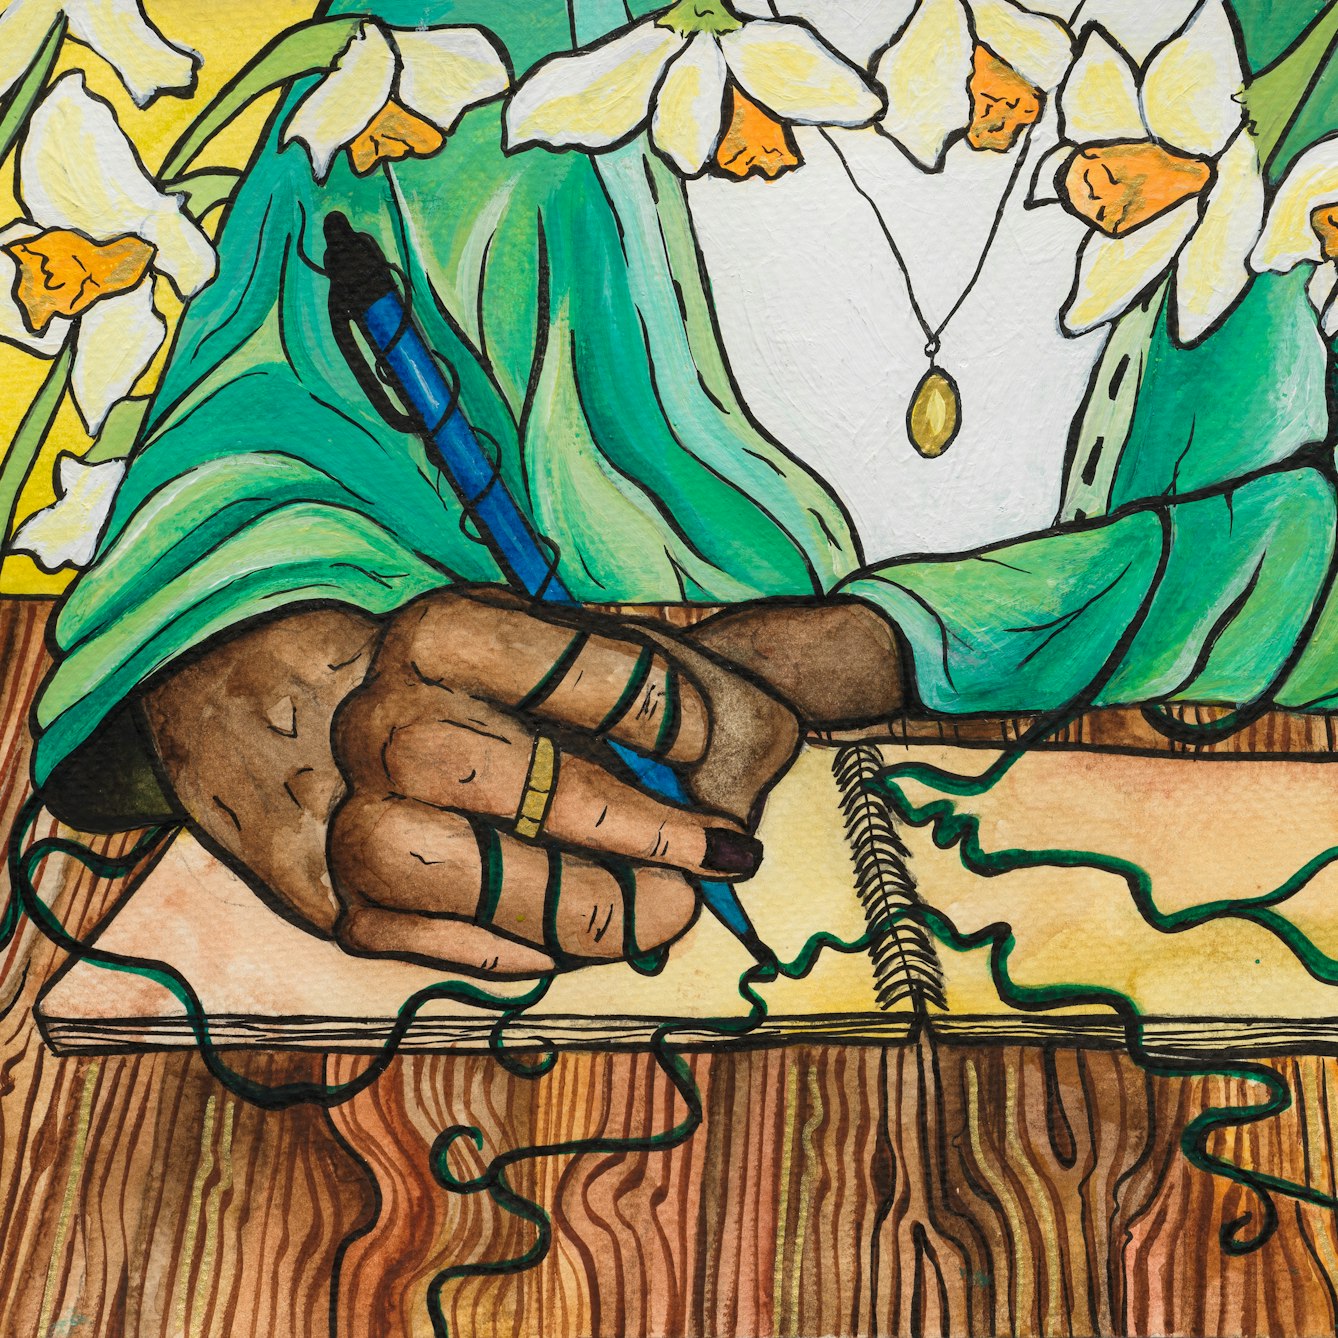 Colourful artwork. The artwork shows a person writing in a spiral-bound notebook. They are wearing a green cardigan with a necklace and are holding a pen in their right hand. Their nails are painted and are wearing a ring. From the pen nib, vines extend across the notebook pages, wrapping around the person's hand and over onto the wooden table they are sat at. At the top of the artwork there are daffodils which are growing from behind the table in front of a yellow wall. 